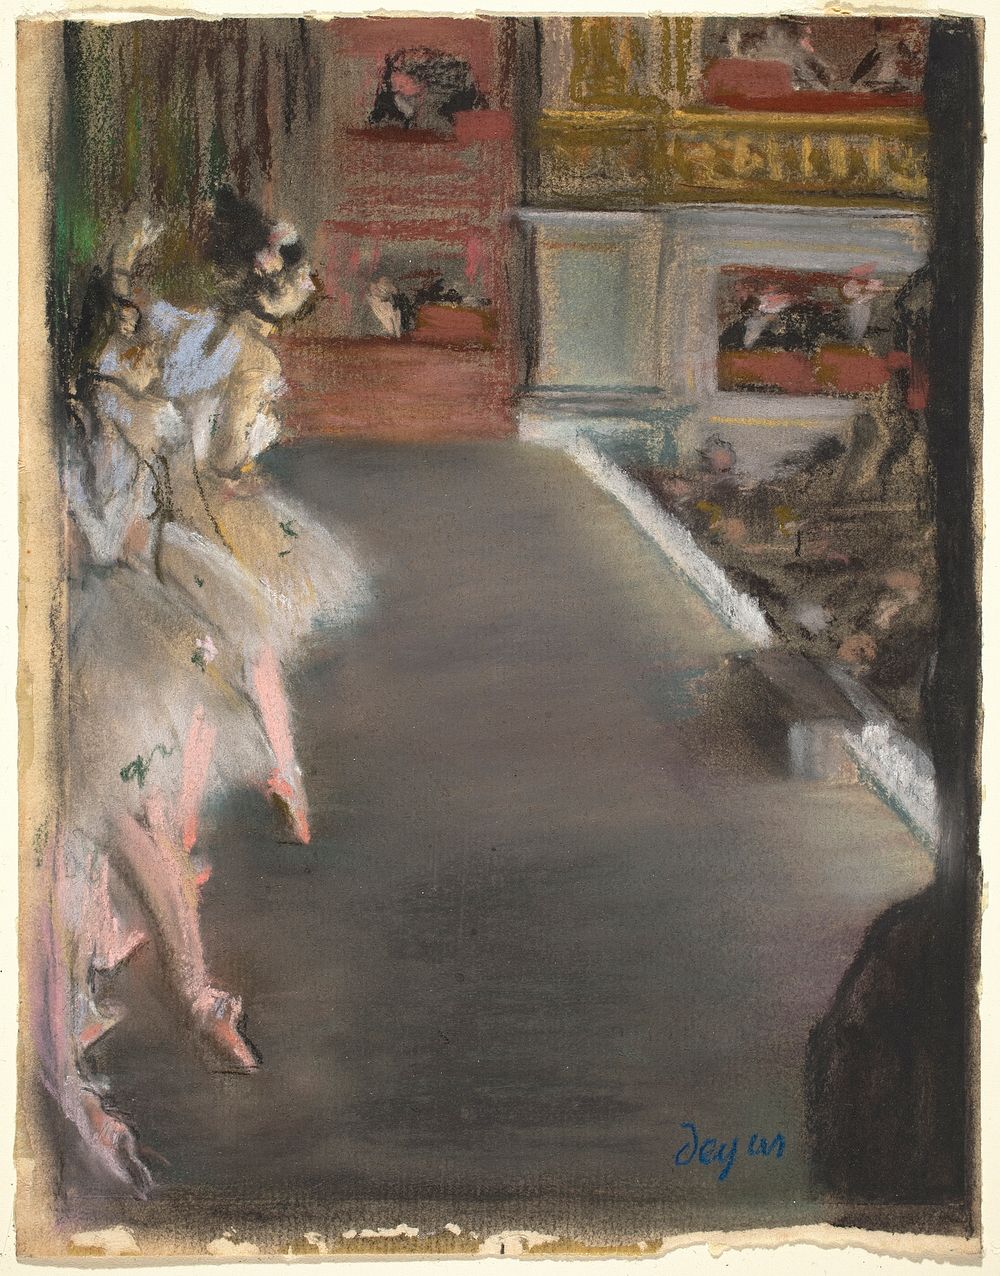 Dancers at the old Opera House (ca. 1877) by Edgar Degas.  